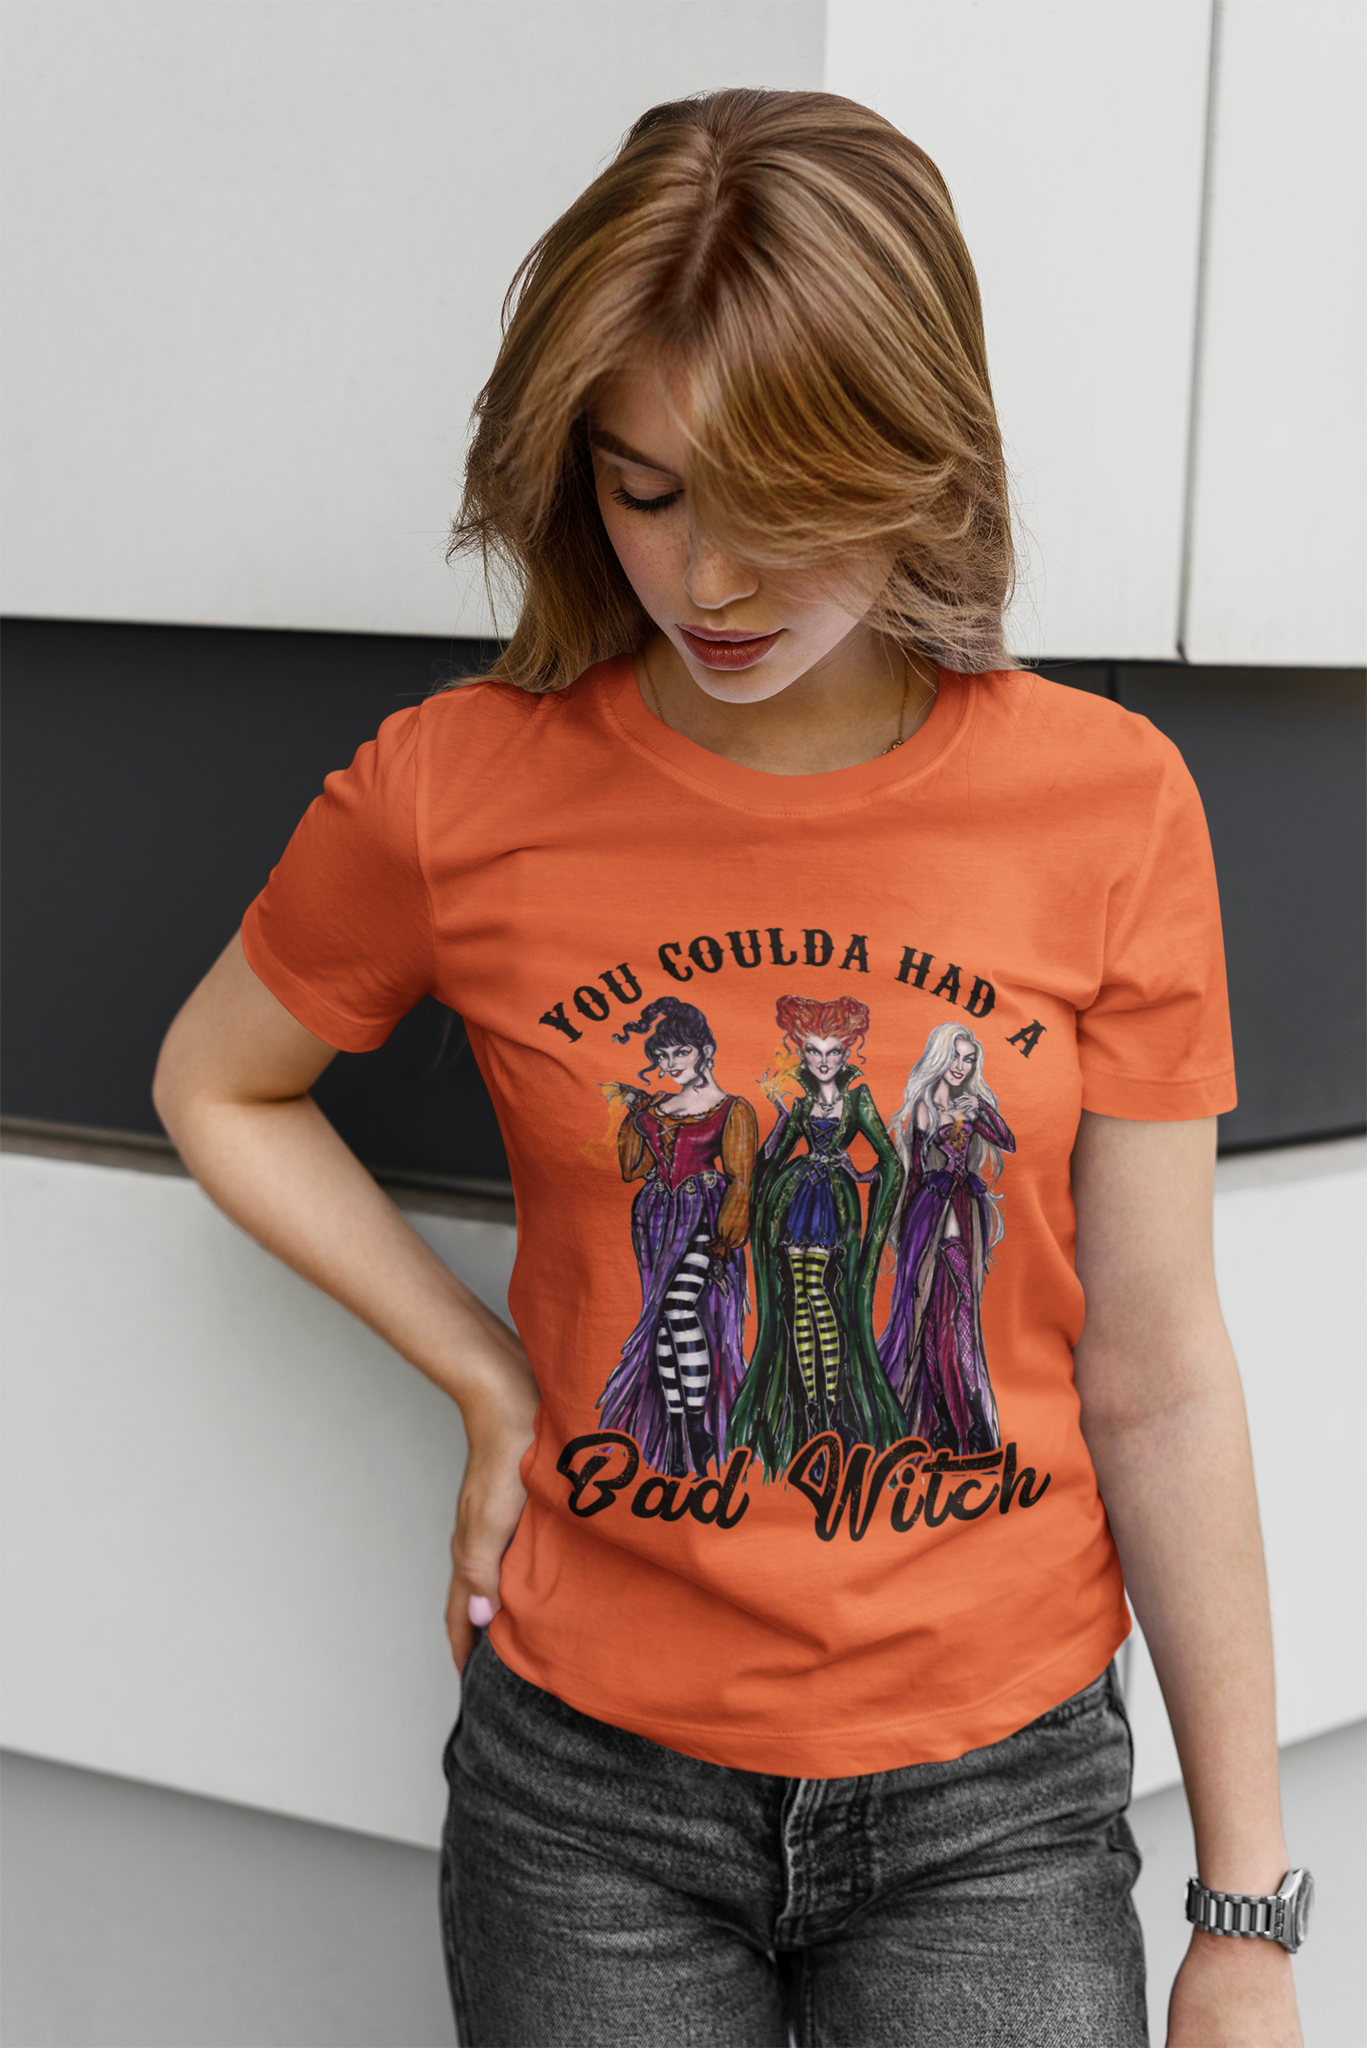 Hocus Pocus Tshirt, You Coulda Had A Bad Witch T Shirt, Sanderson Sisters Shirt, Halloween Gifts